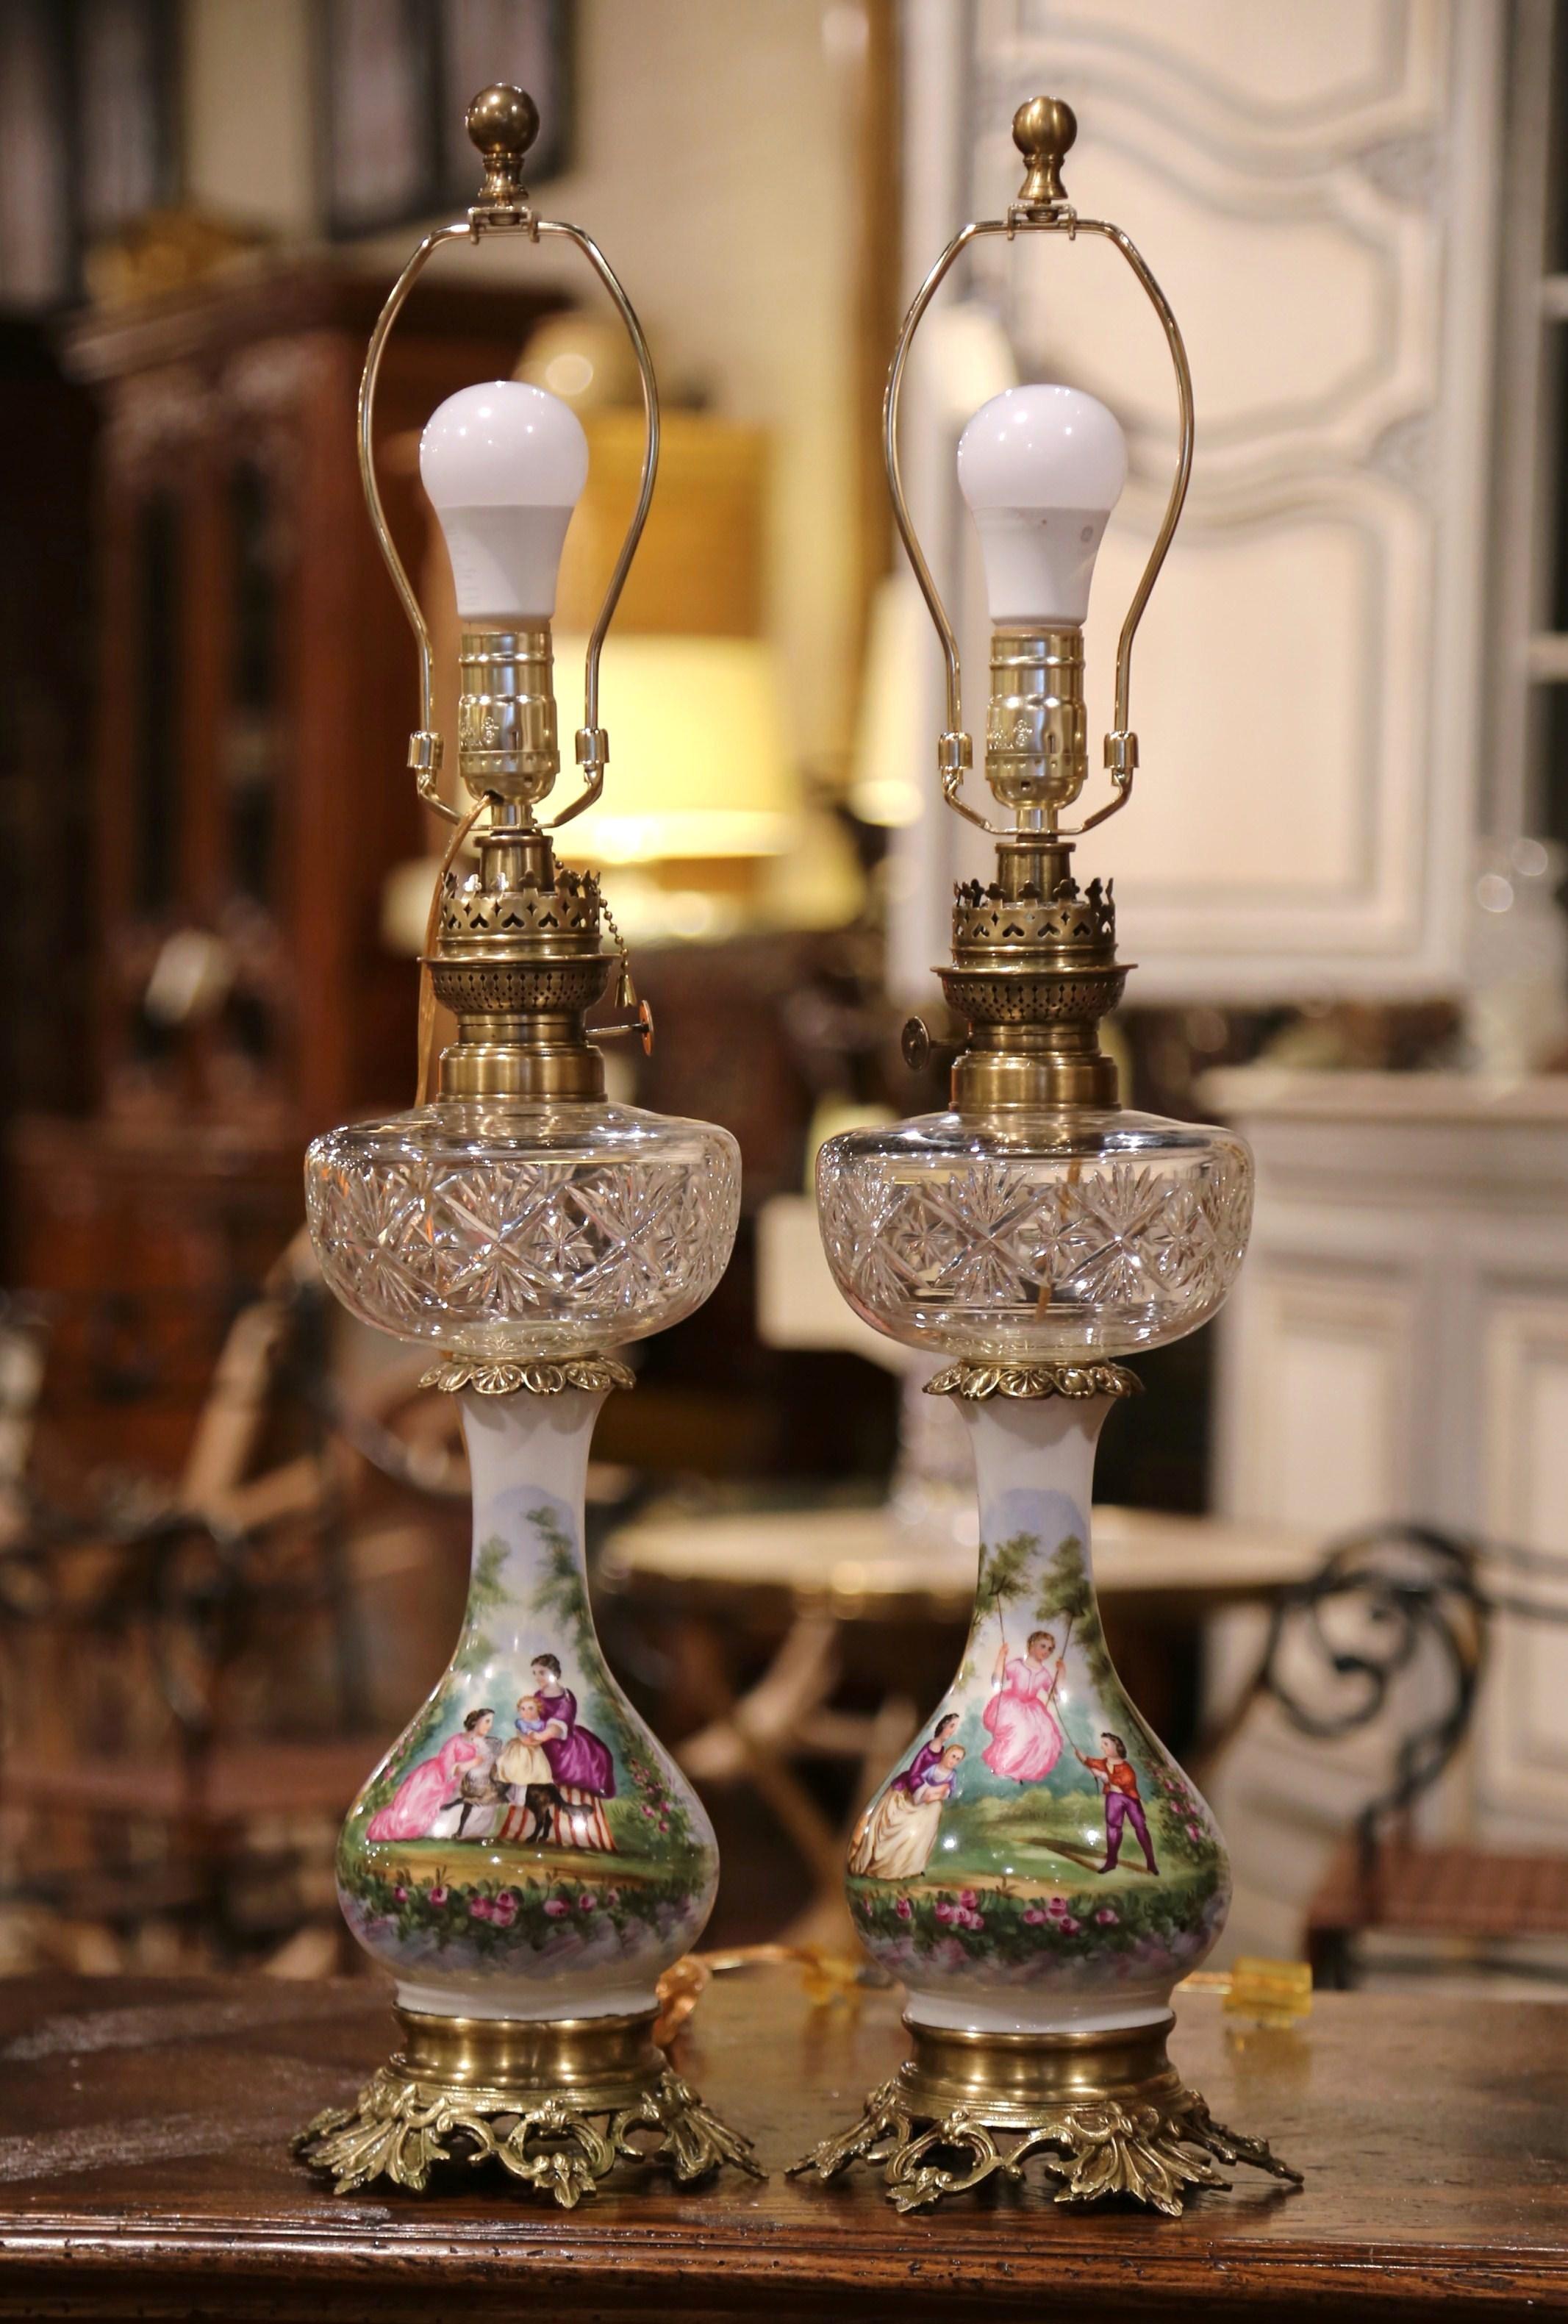 This elegant pair of antique oil lamps made into table lights was crafted in France, circa 1880. The tall 